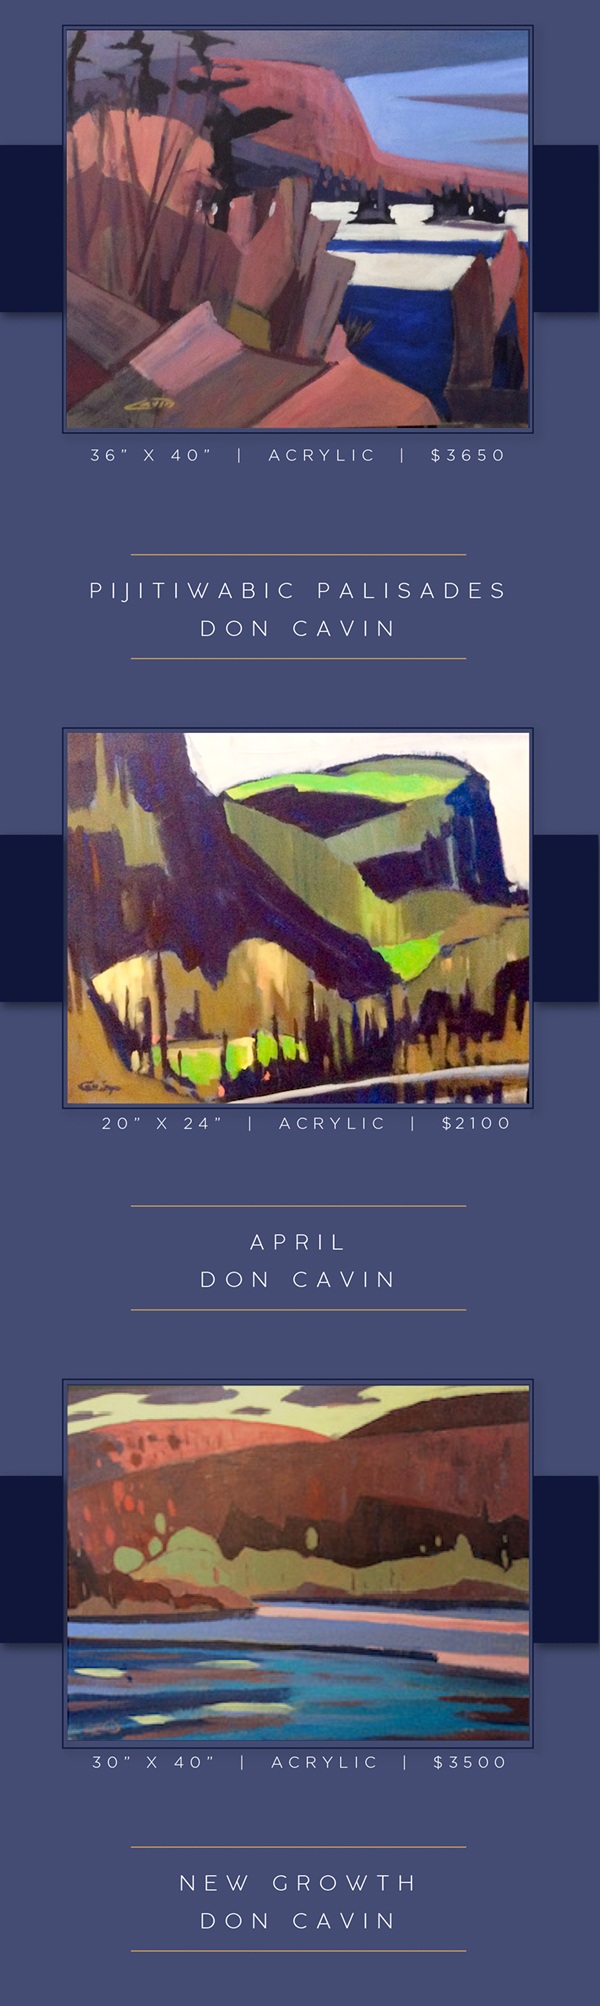 The Dawning of Spring - Show of Original Fine Paintings